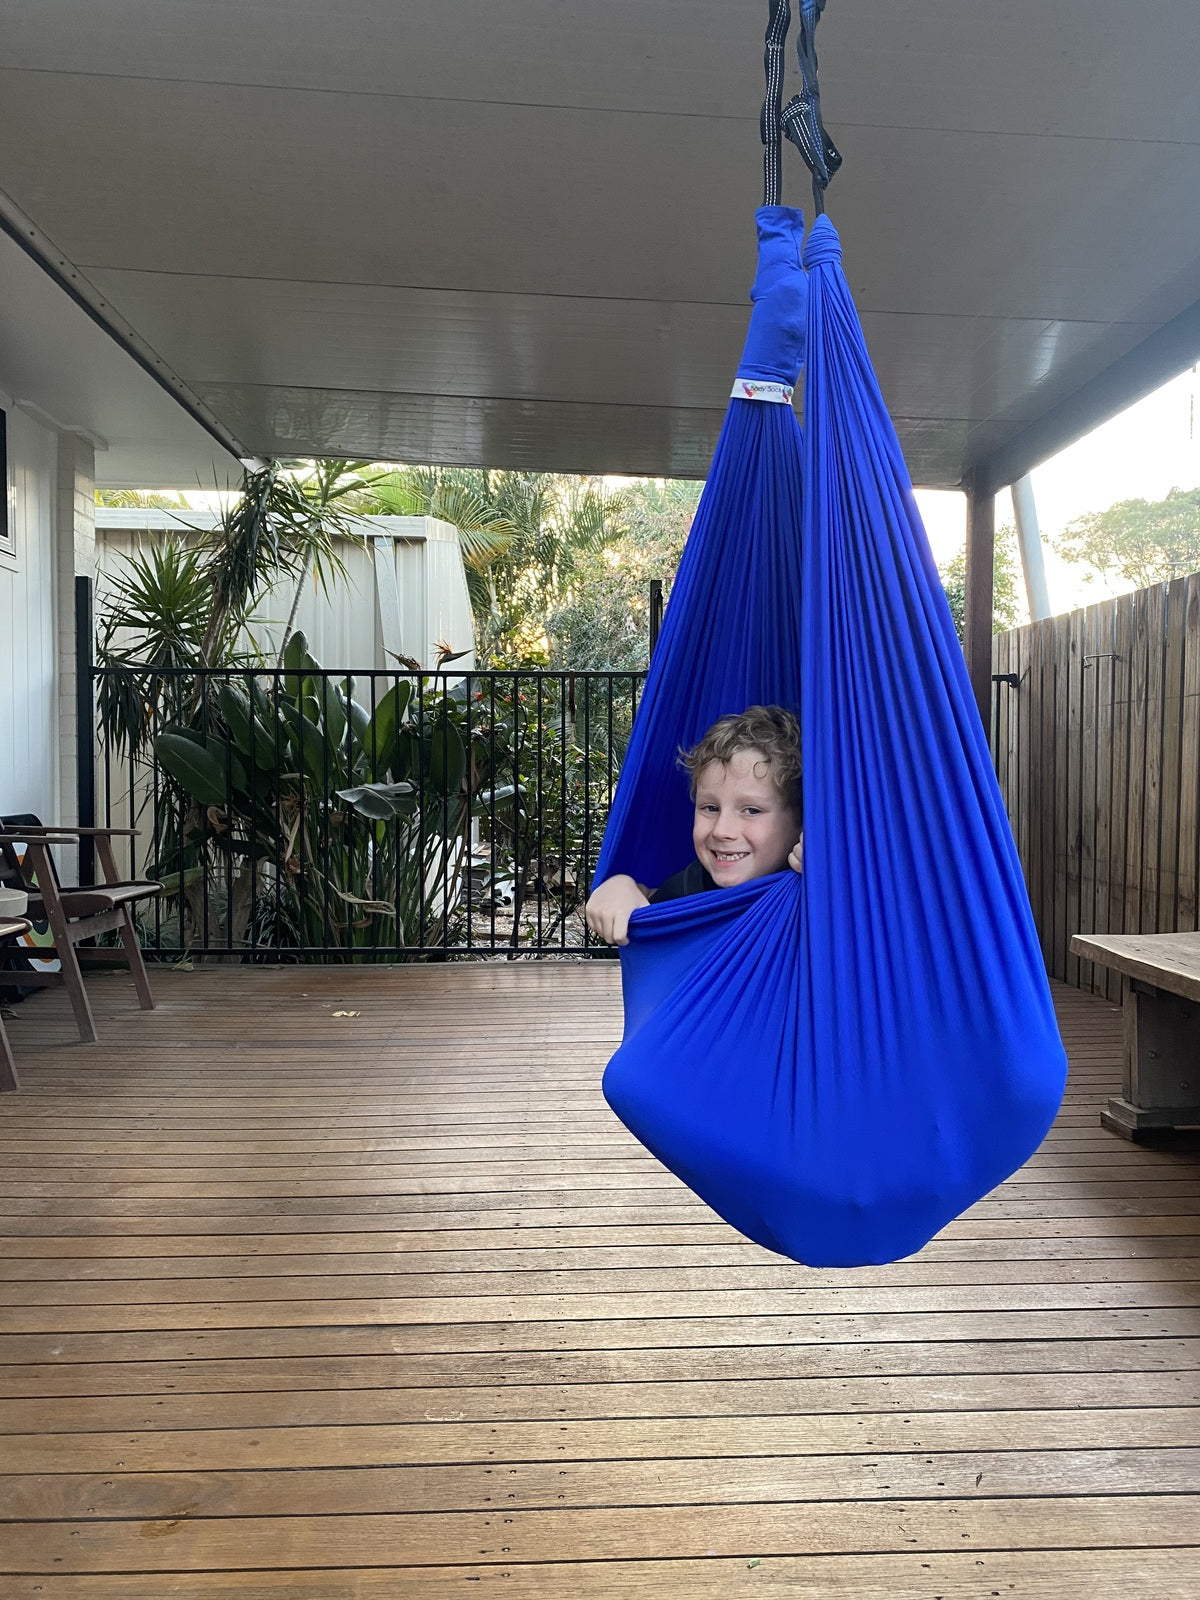 Lycra Therapy Swing- up to 100kgs